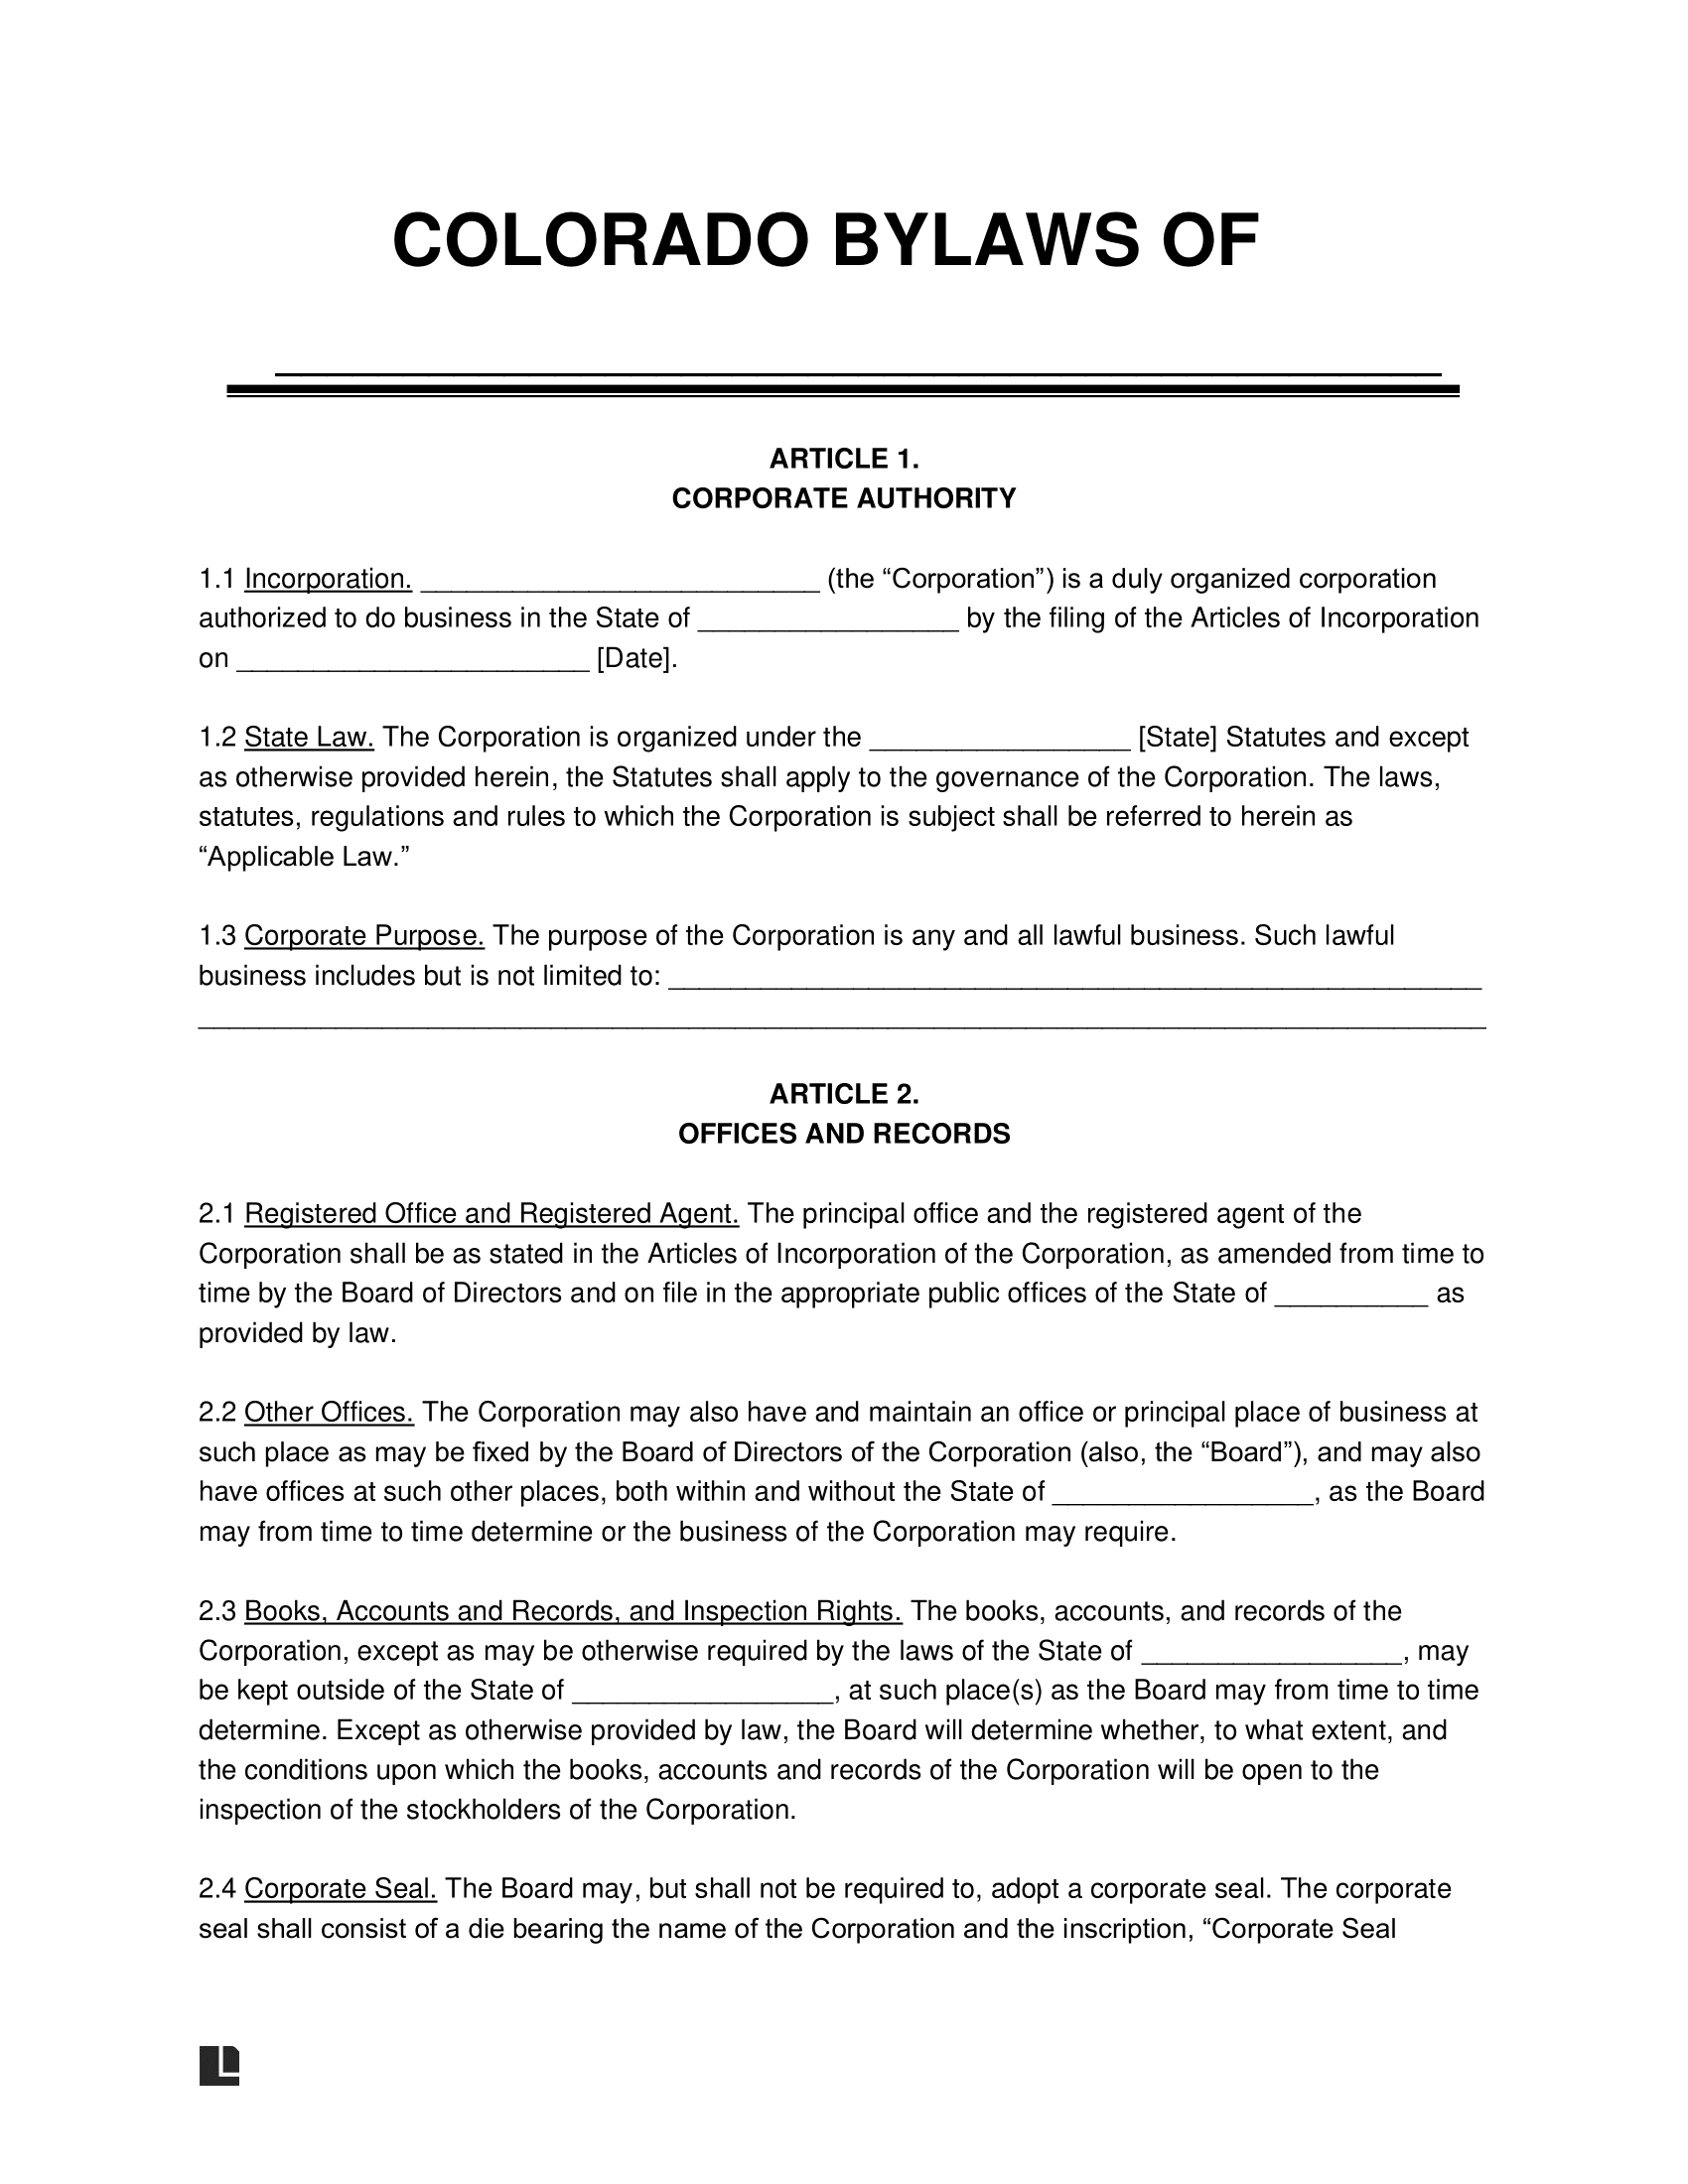 Colorado Corporate Bylaws Template